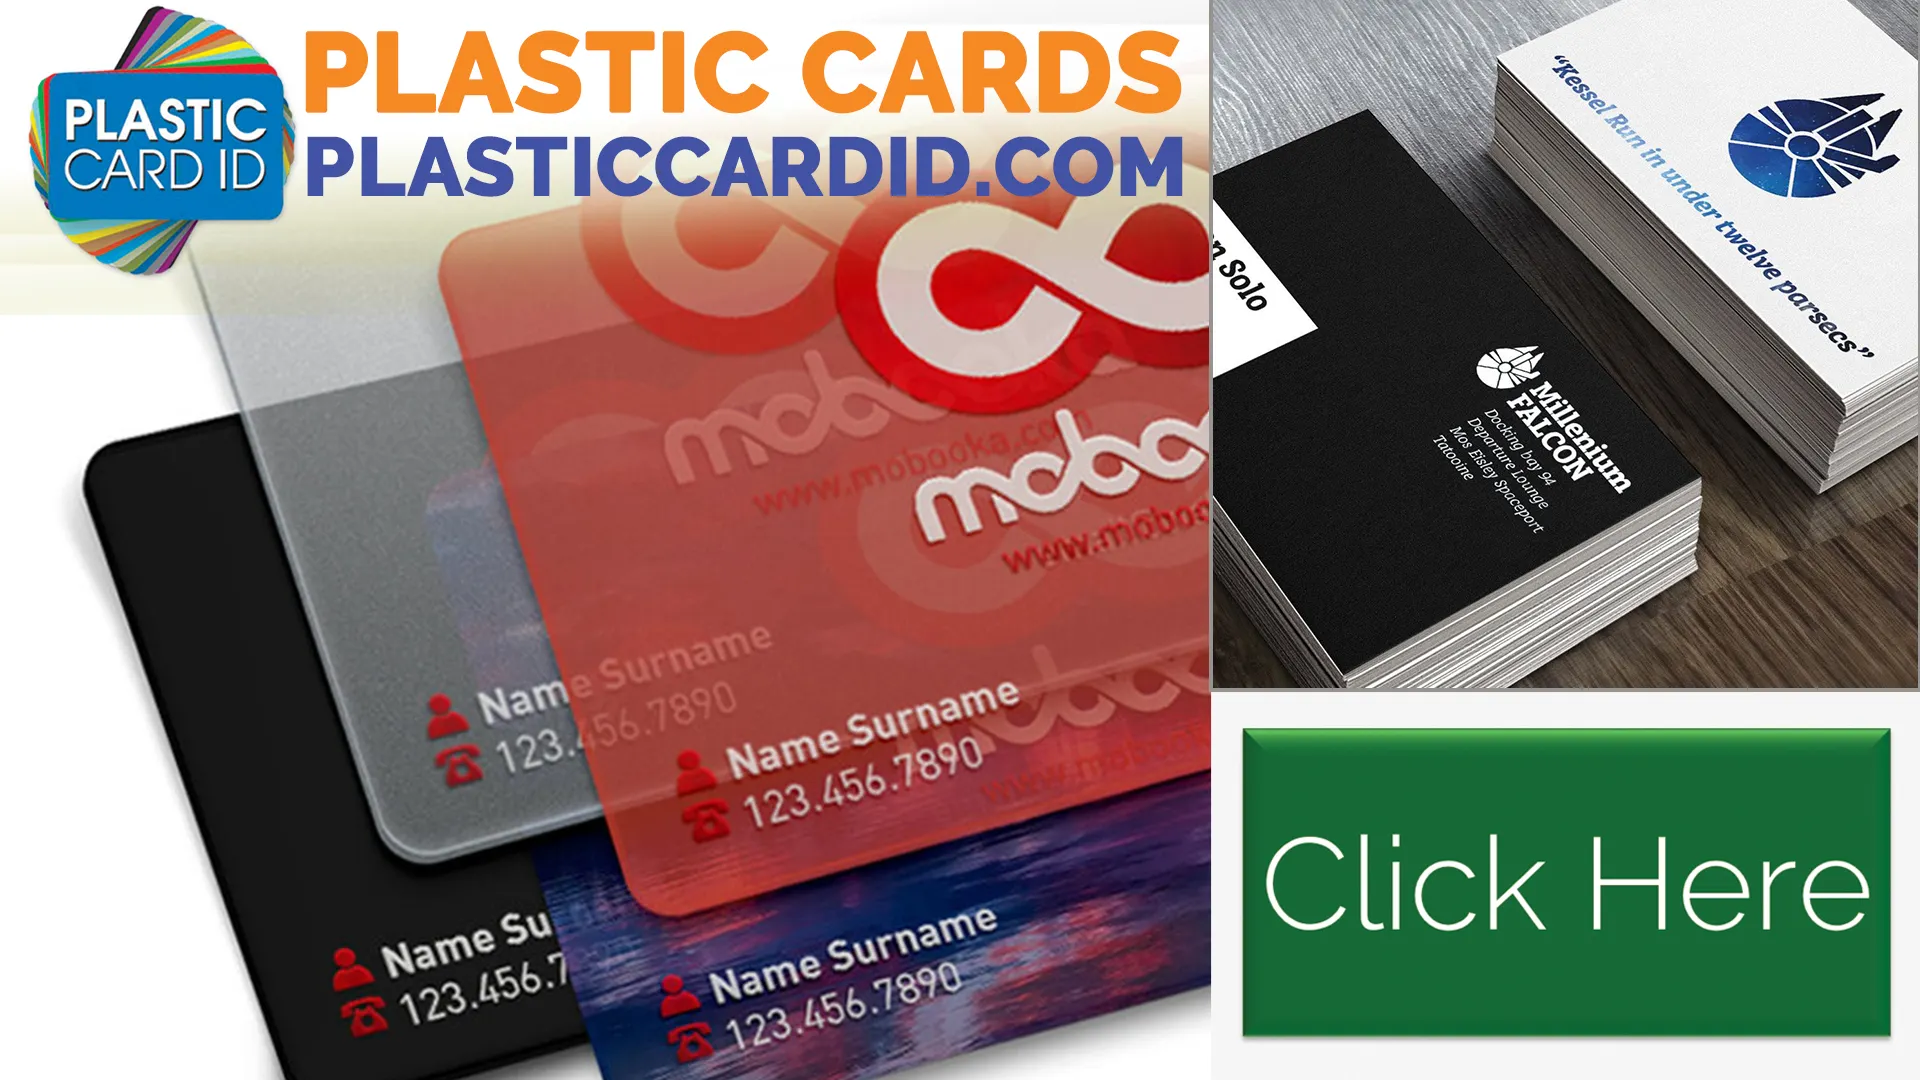 Discover a Wide Selection of Plastic Card Options